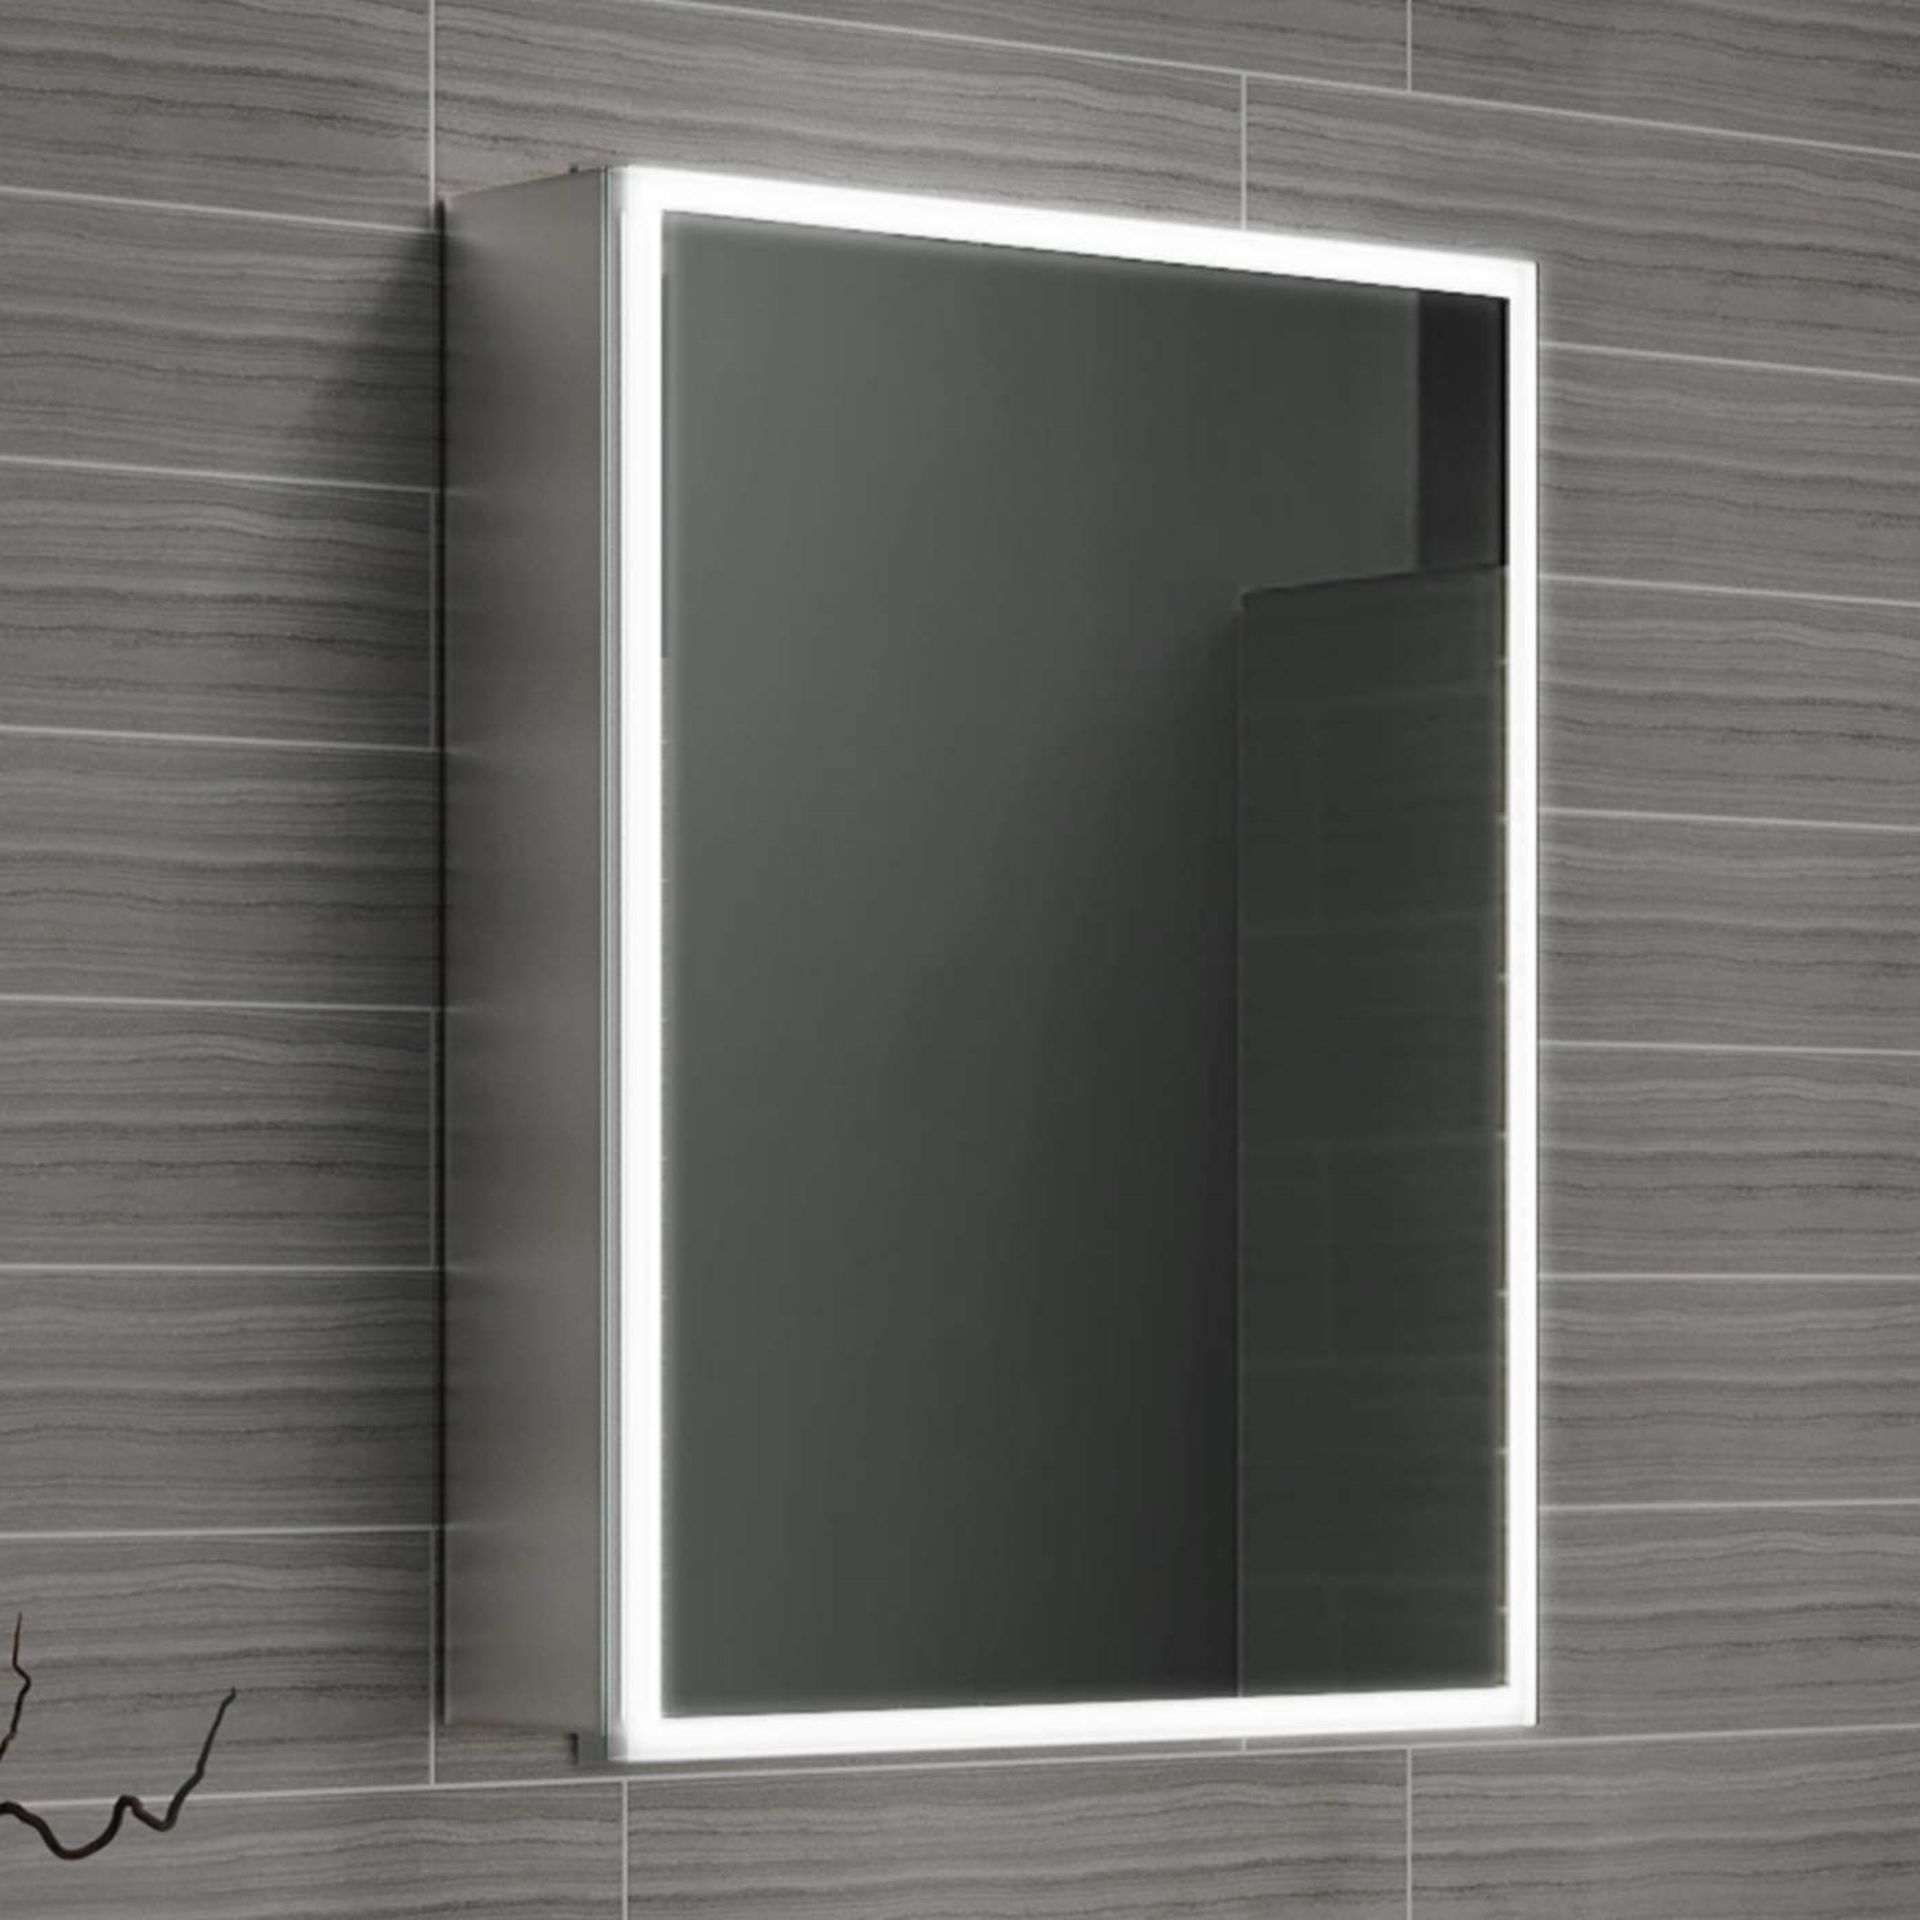 450x600 Cosmic Illuminated LED Mirror Cabinet. RRP £499.99.MC161.We love this mirror cabinet a... - Image 2 of 3